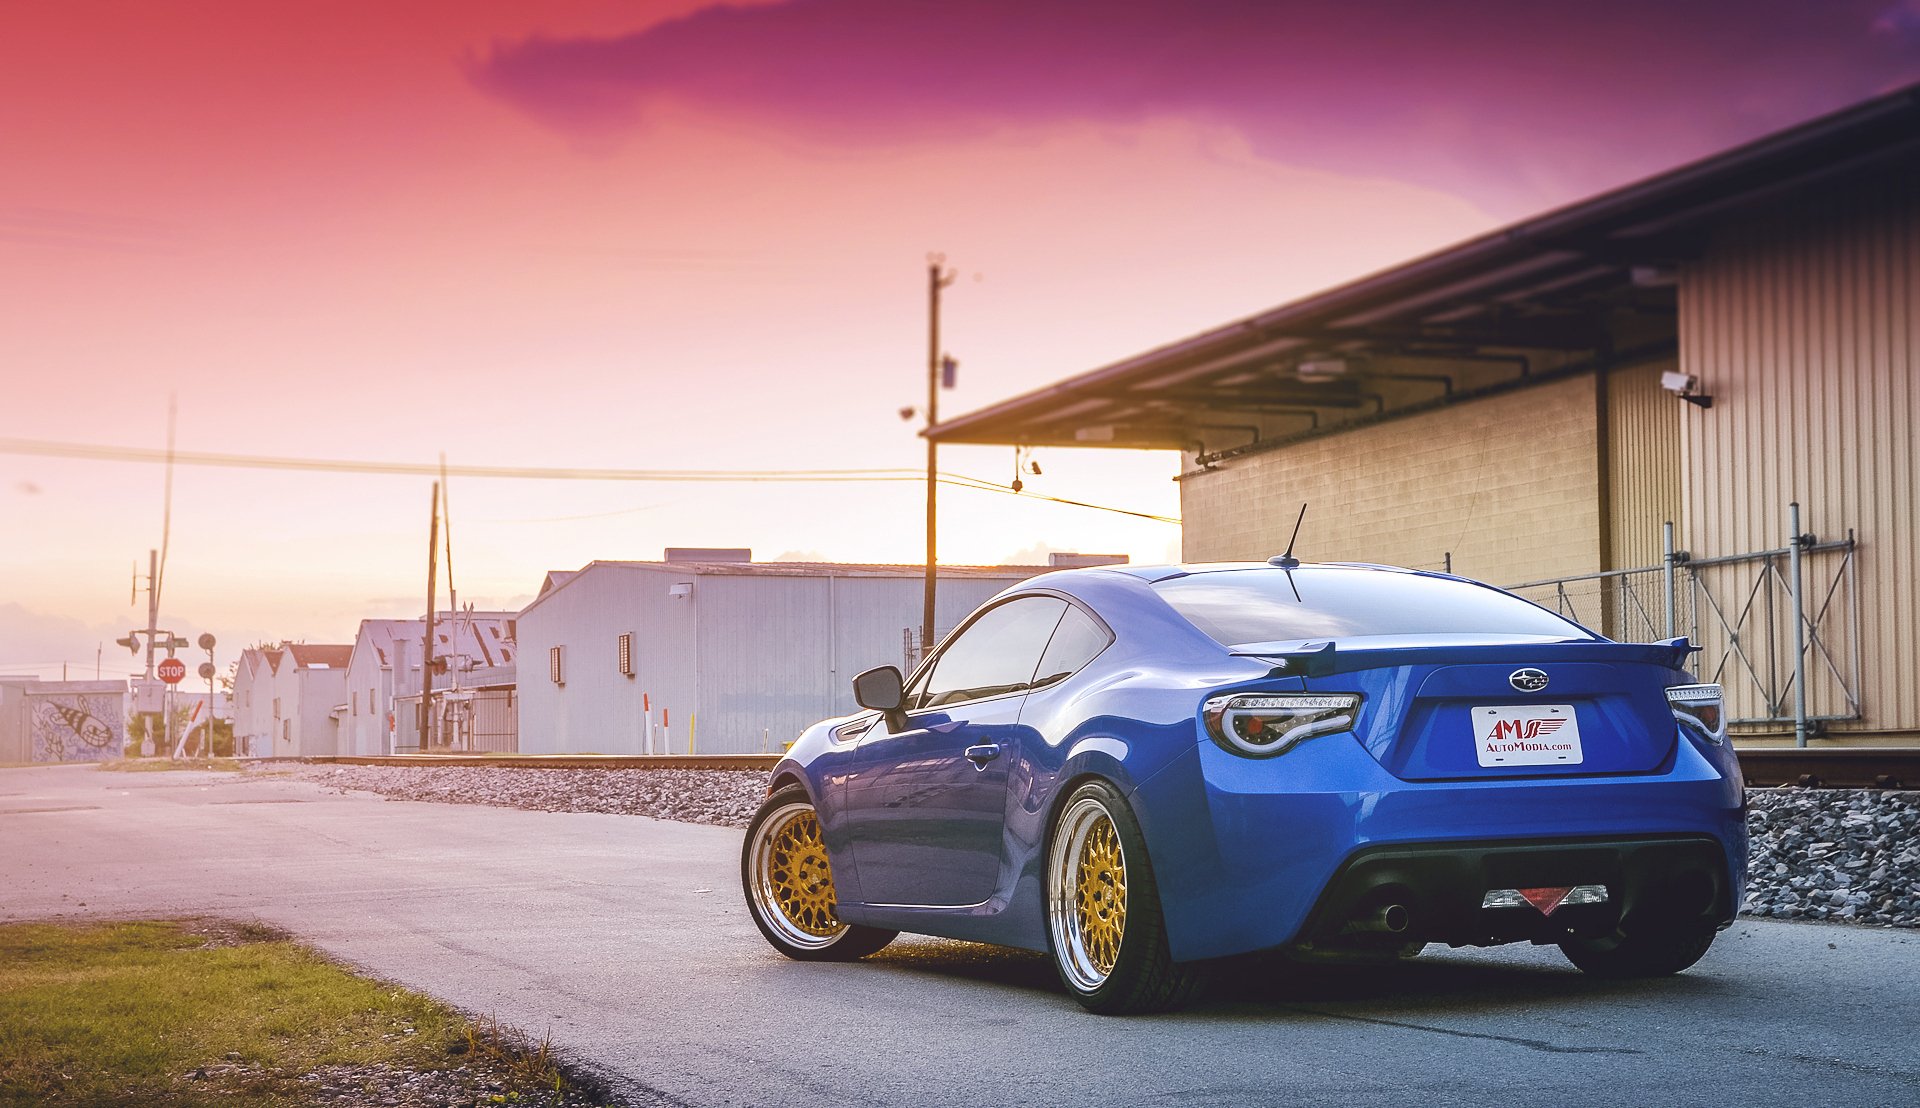 Subaru Brz Hd Wallpapers Background Images Wallpaper Abyss